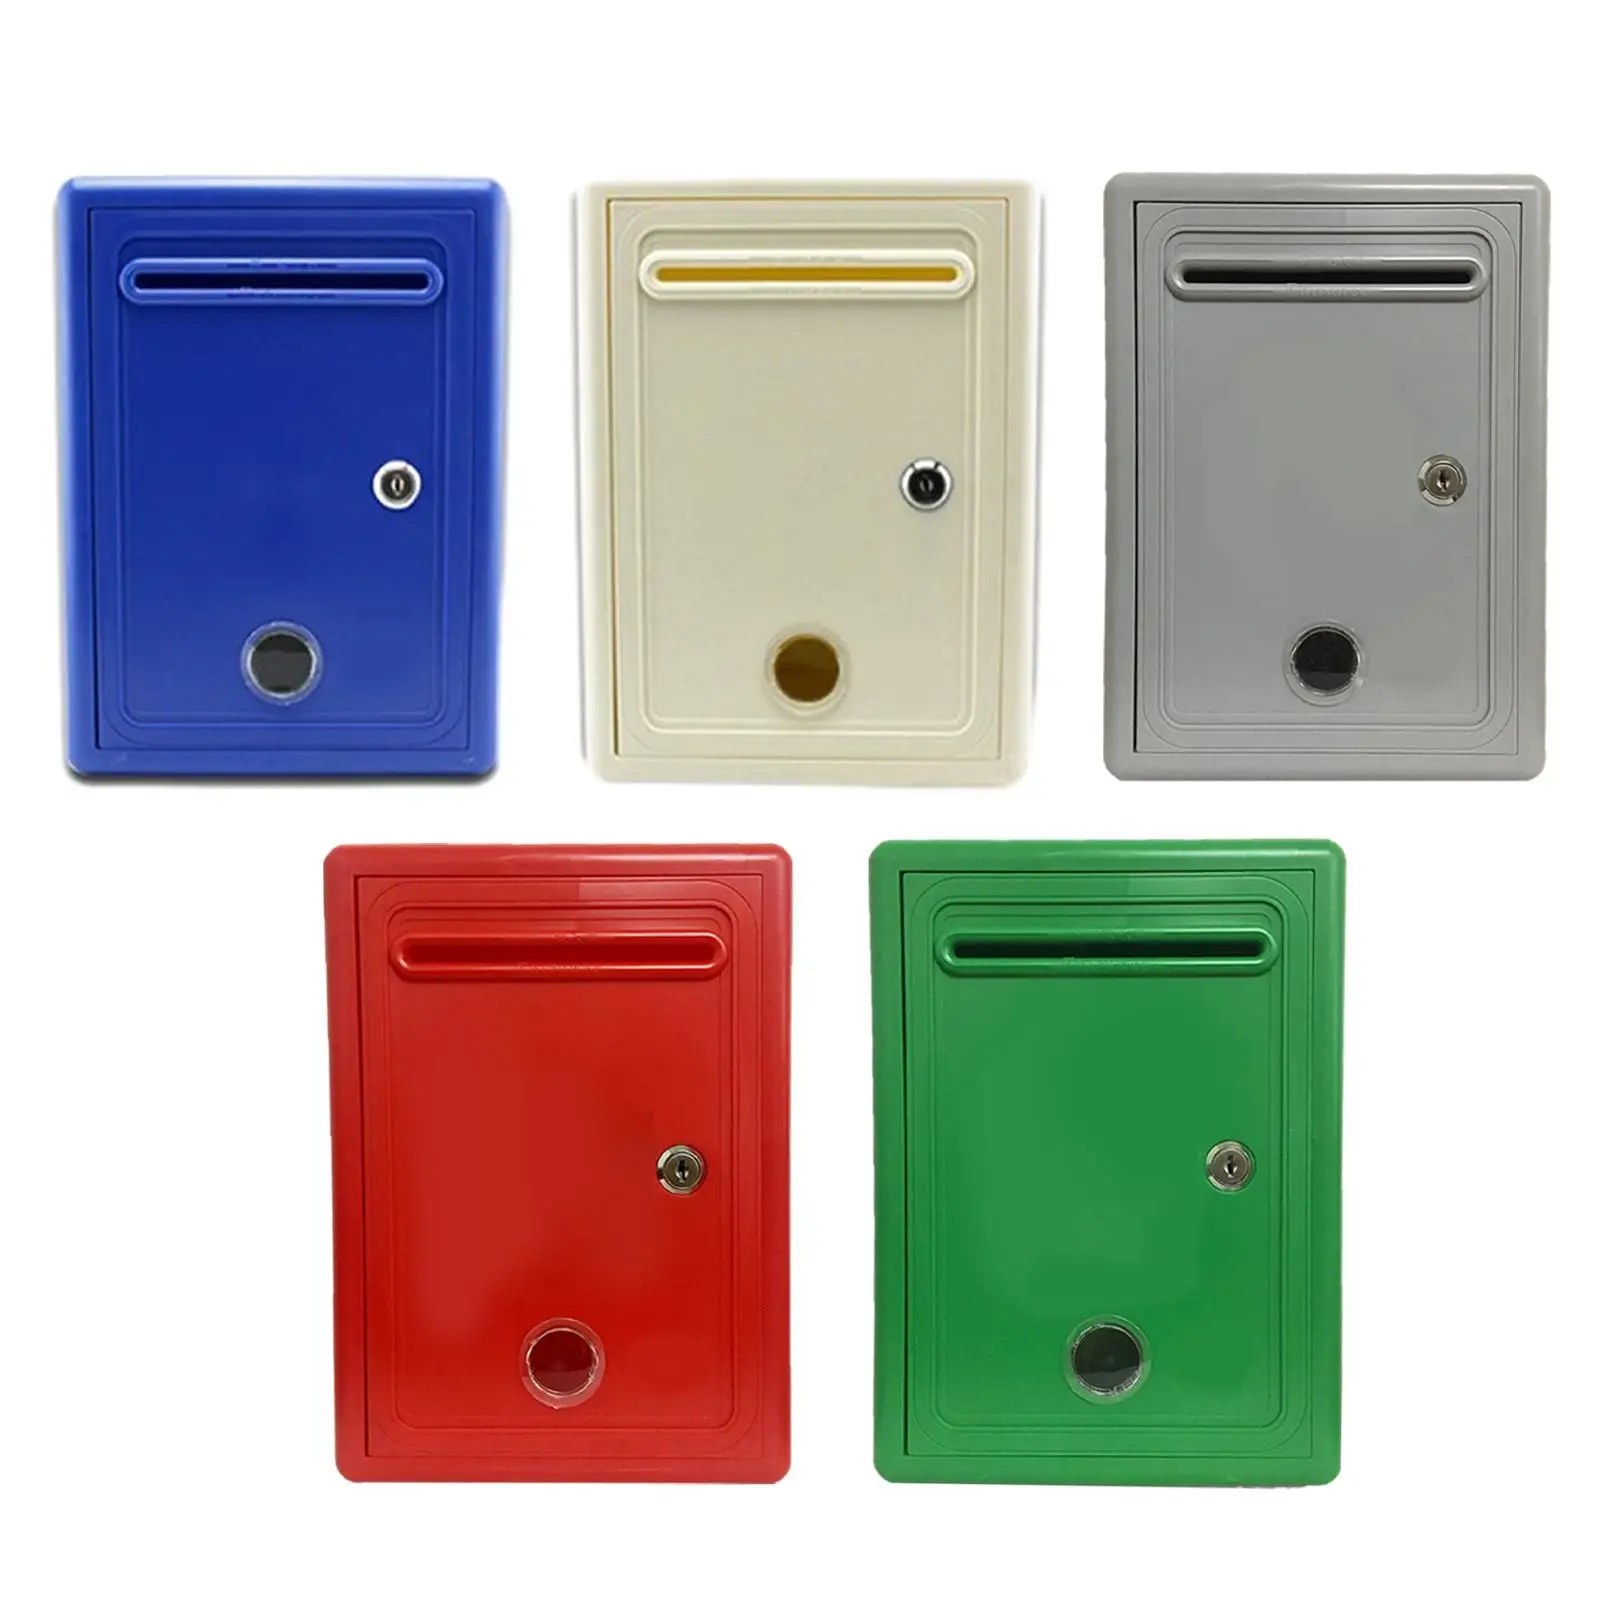 Suggestion Drop Box Letter Box Waterproof Locking with Slot and Lock Complaint